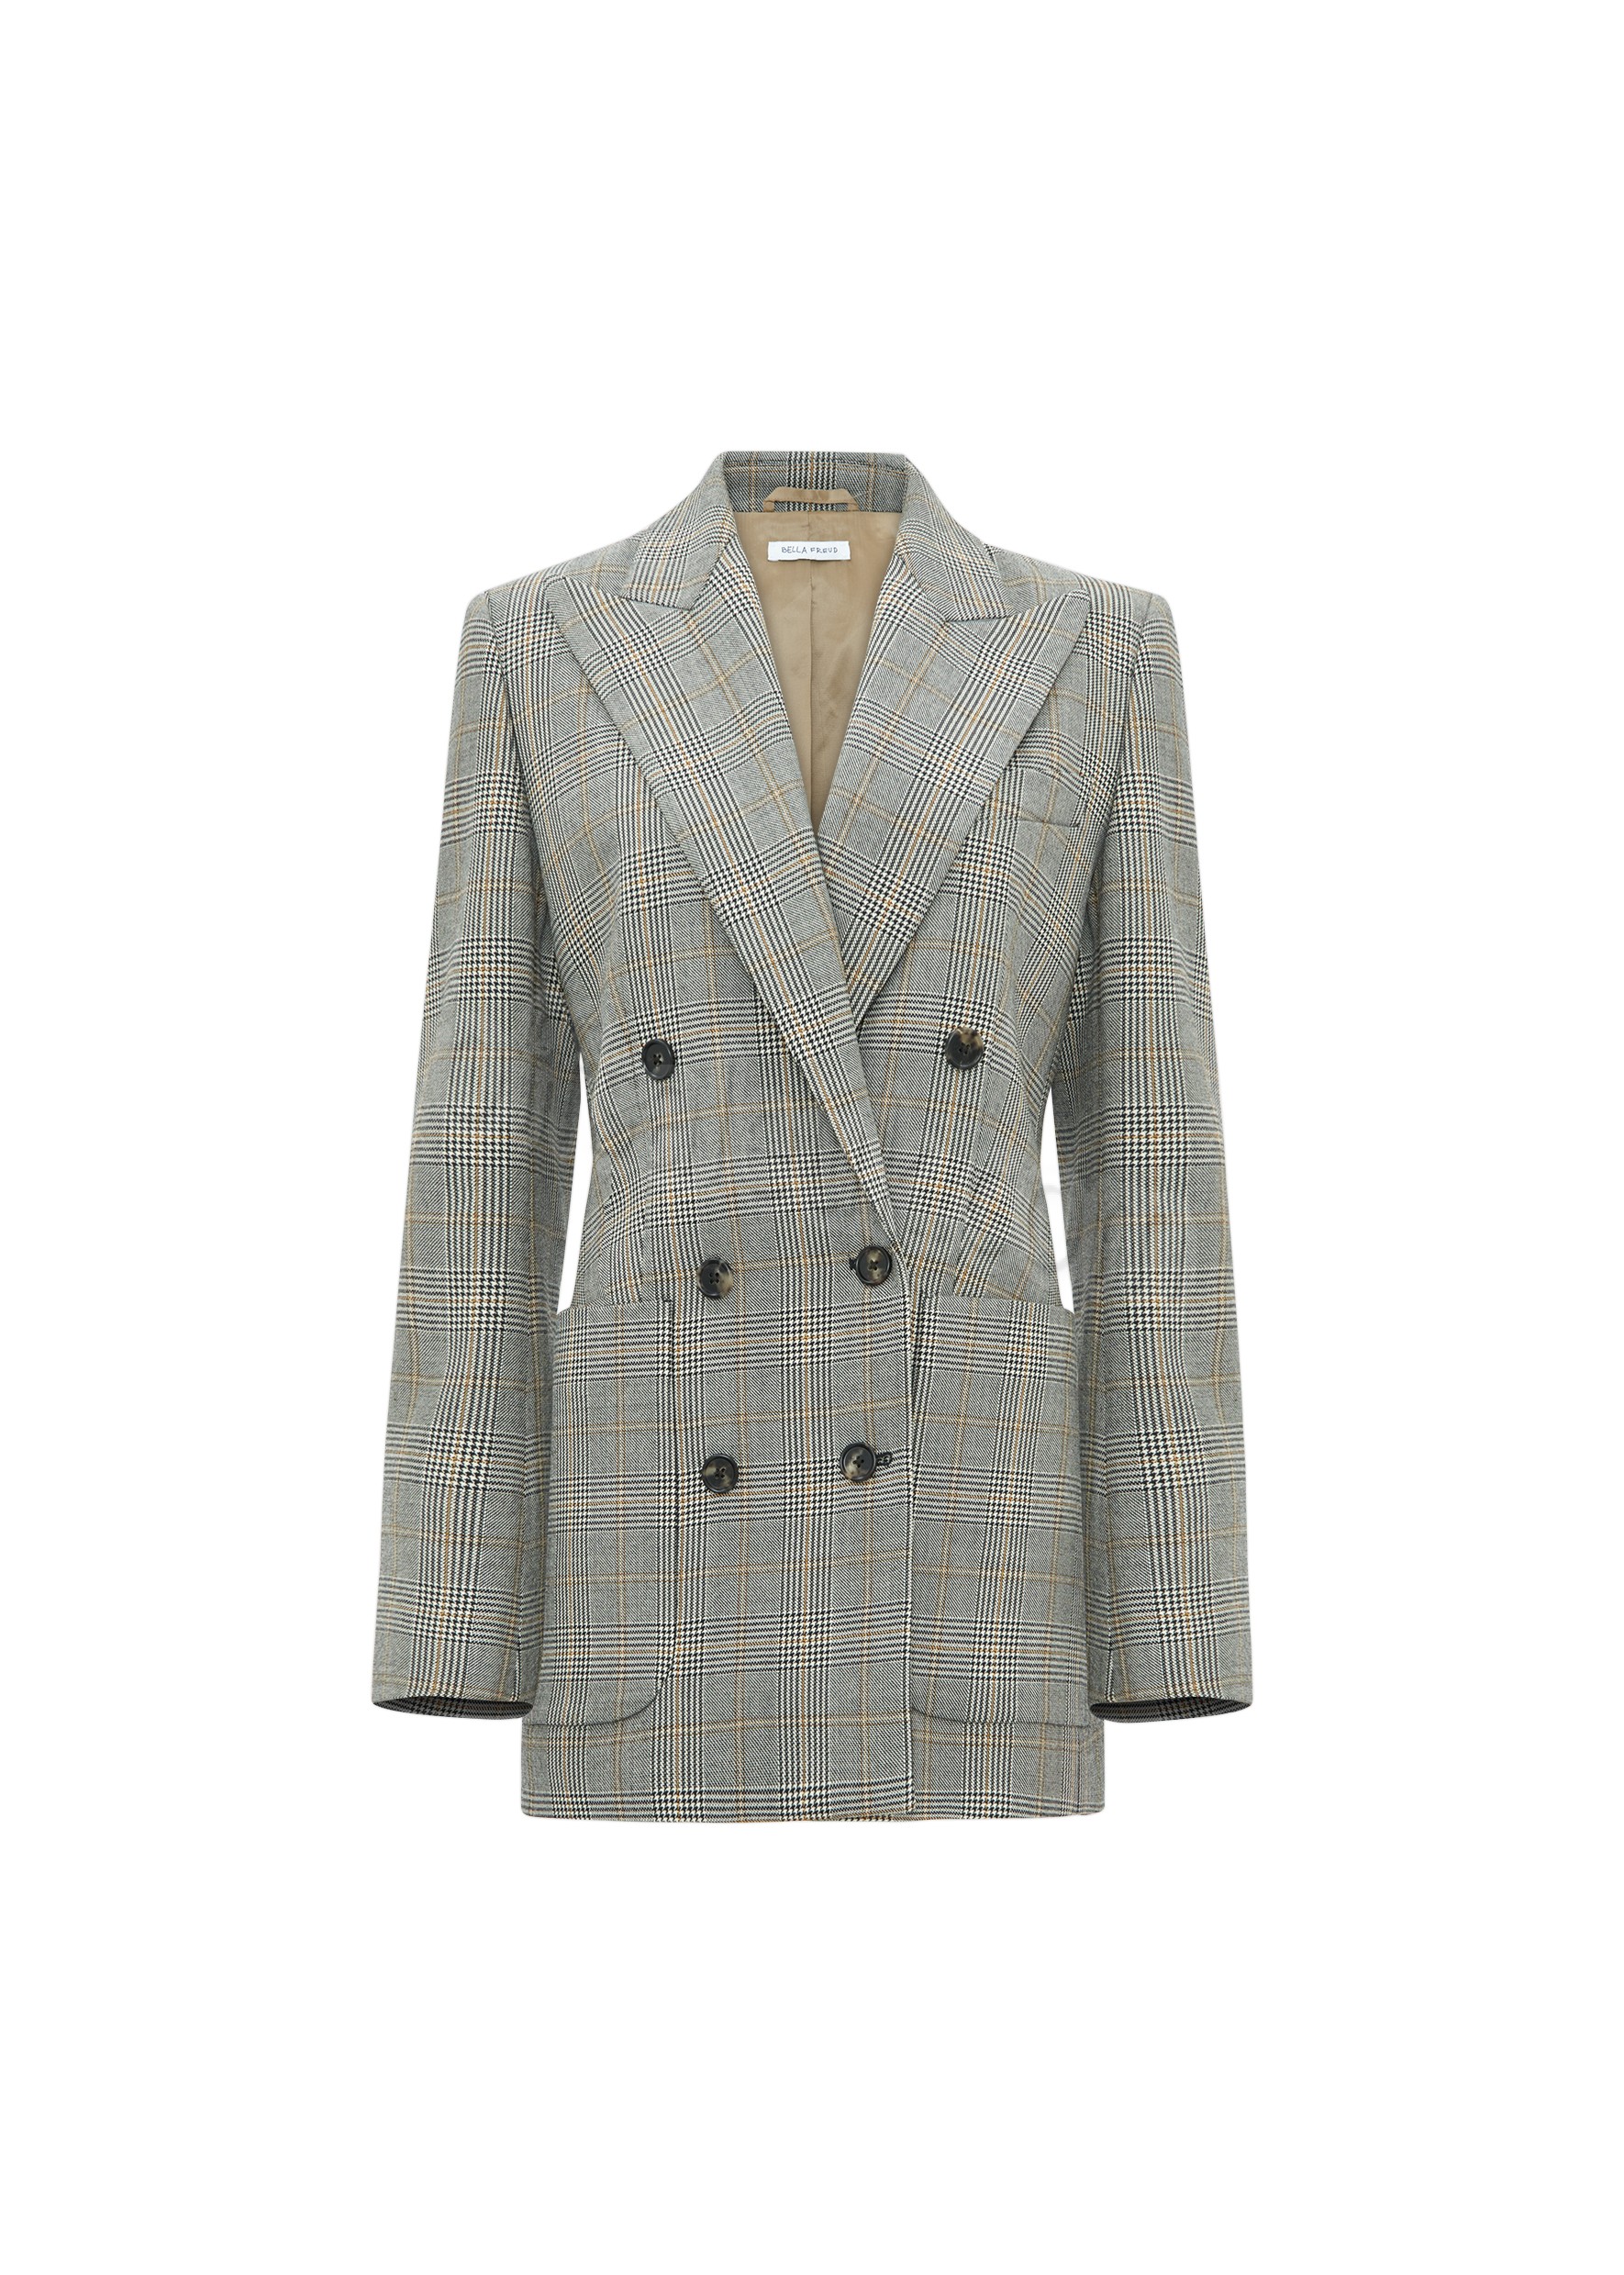 Discount Prince Of Wales Bianca Jacket - Discount Prince Of Wales Bianca Jacket